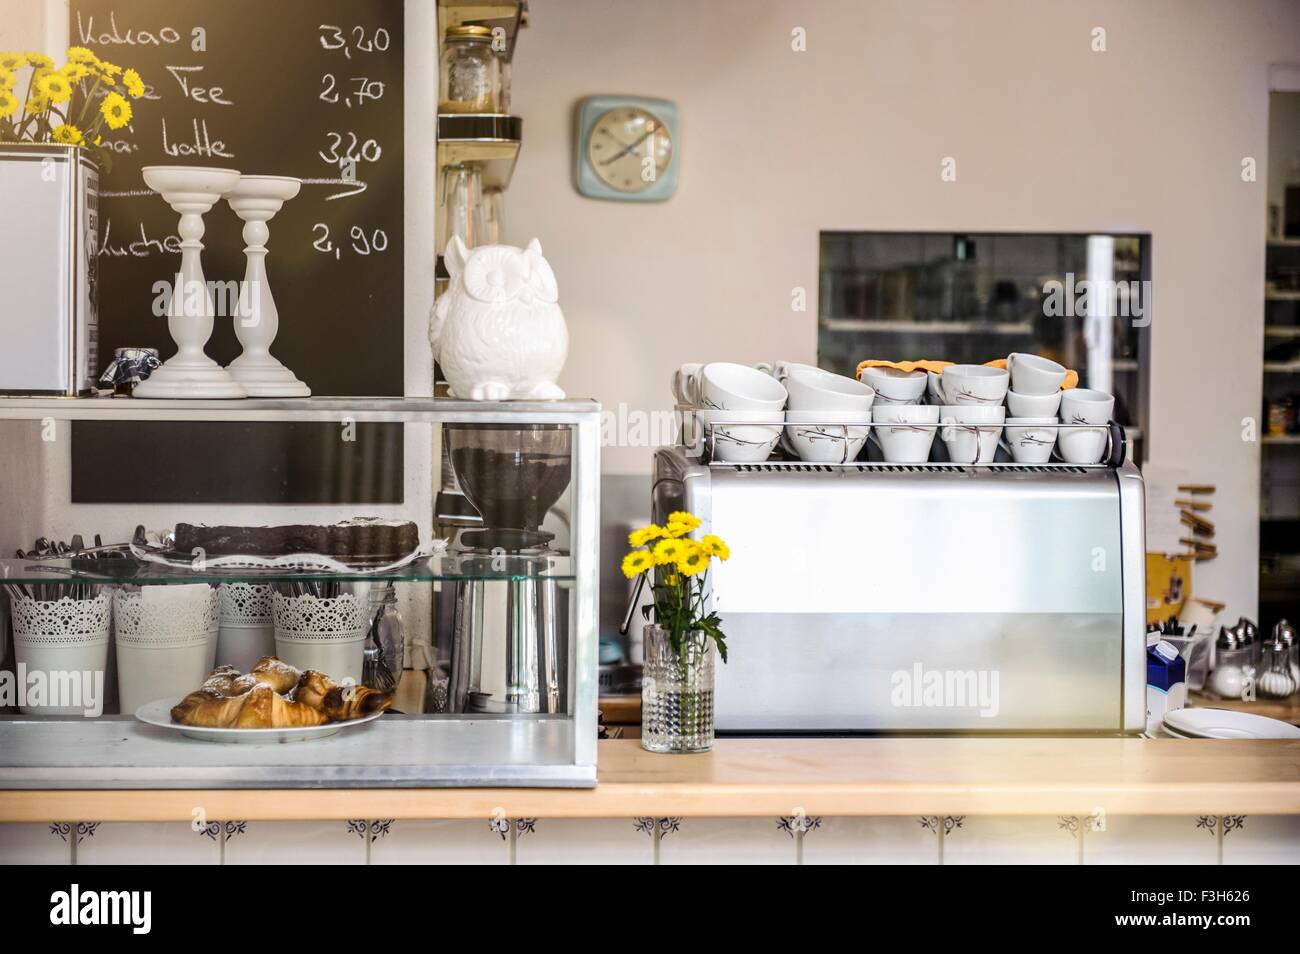 Cafe counter with coffee machine and food display cabinet Stock Photo -  Alamy